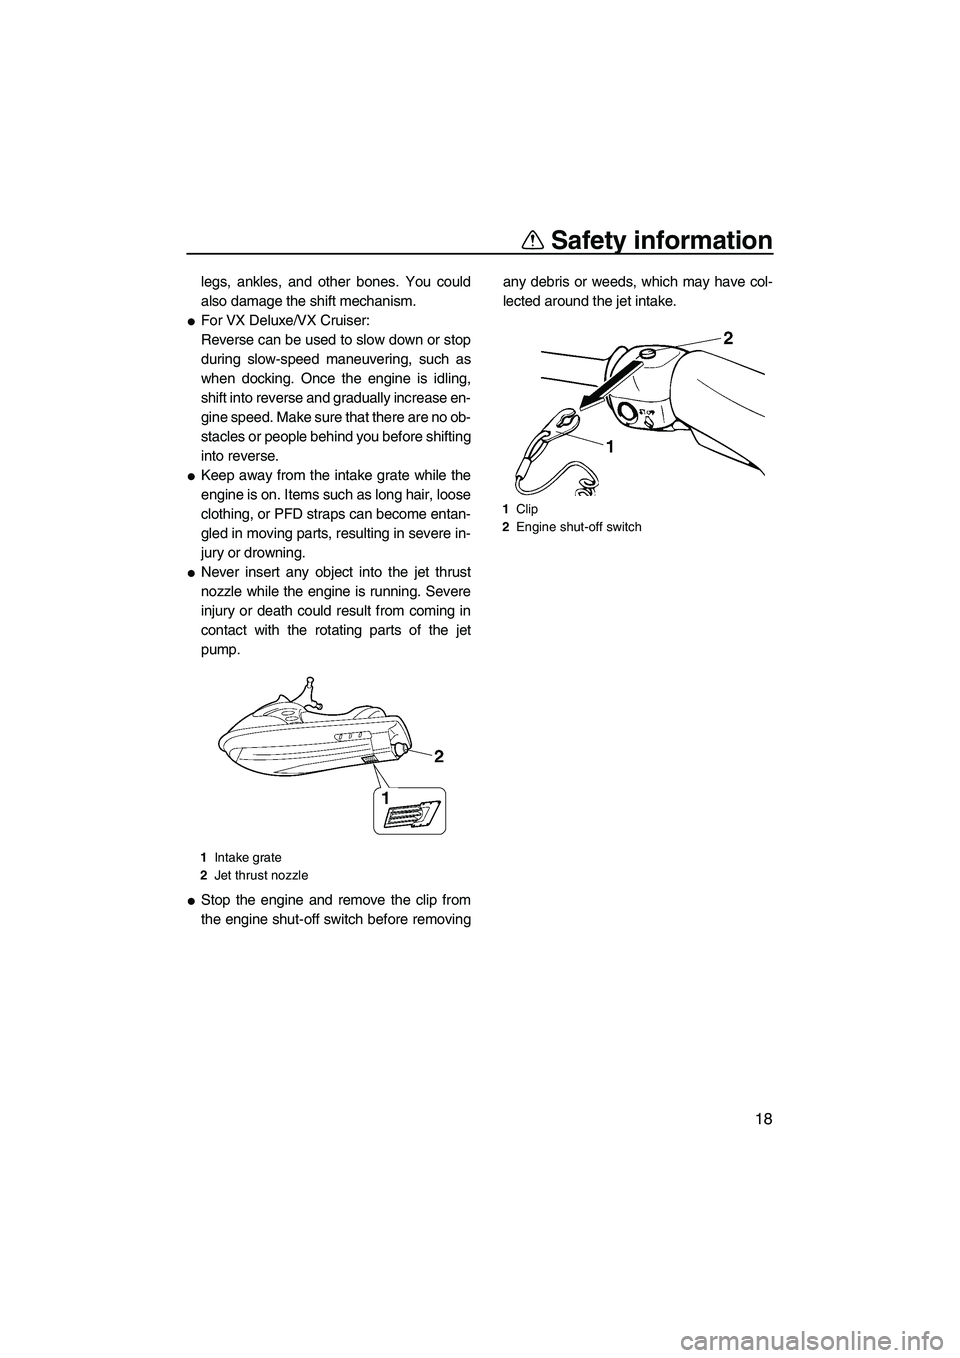 YAMAHA VX CRUISER 2007 Owners Manual Safety information
18
legs, ankles, and other bones. You could
also damage the shift mechanism.
For VX Deluxe/VX Cruiser:
Reverse can be used to slow down or stop
during slow-speed maneuvering, such 